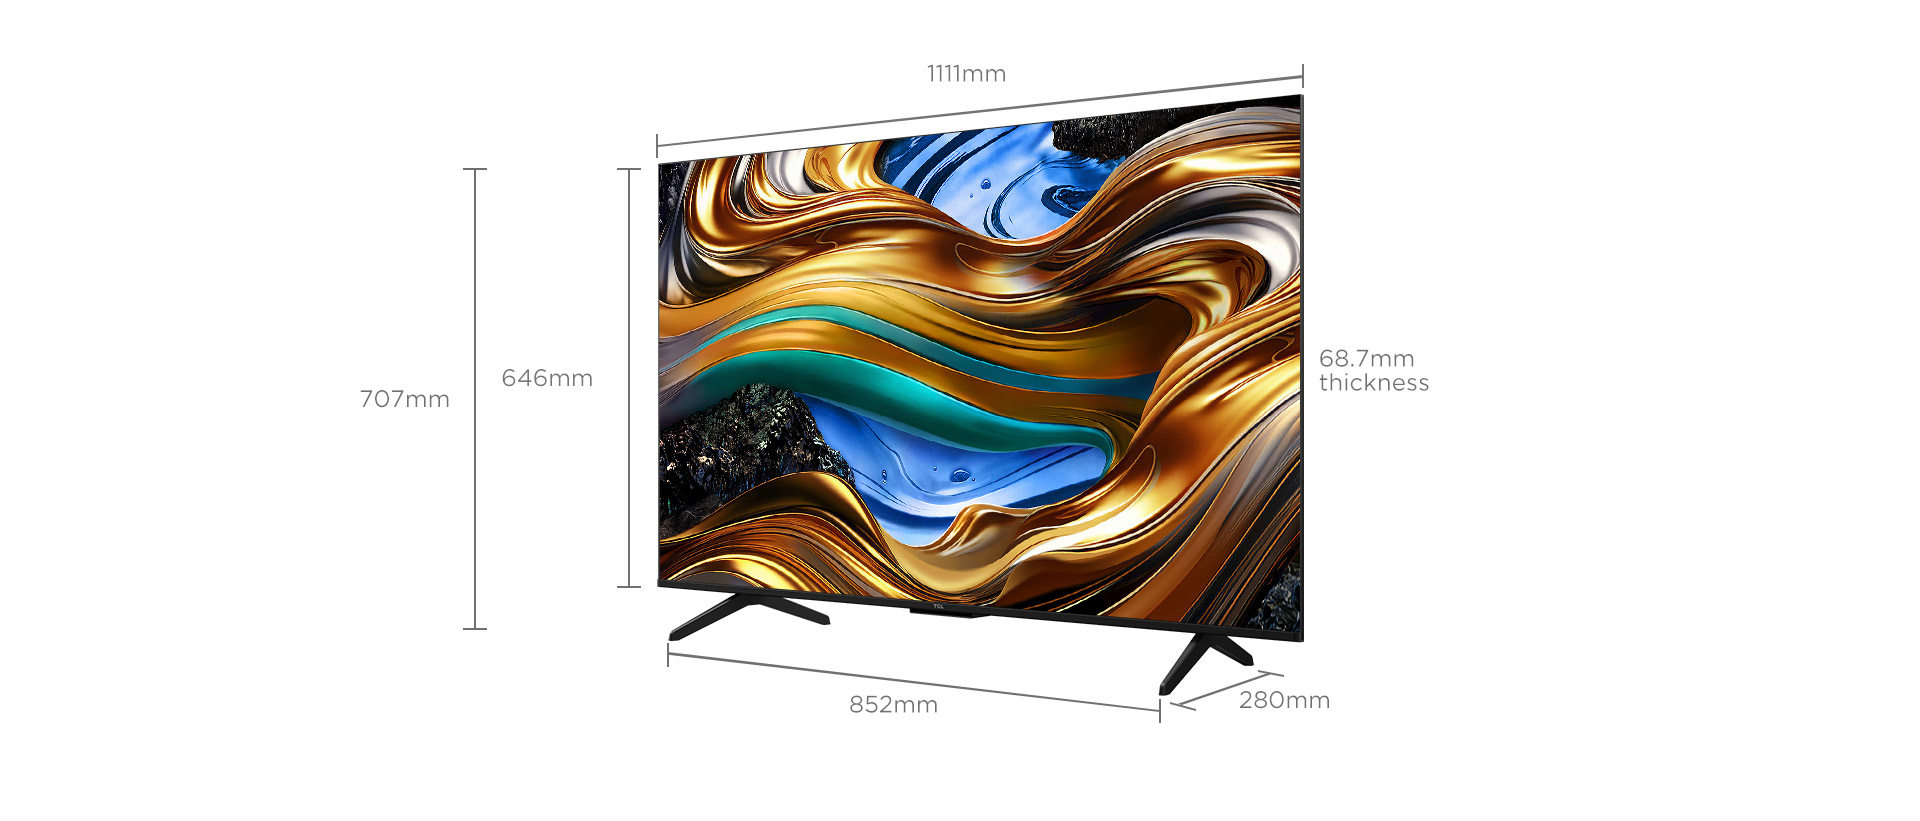 55 inch TCL P755 Smart TV